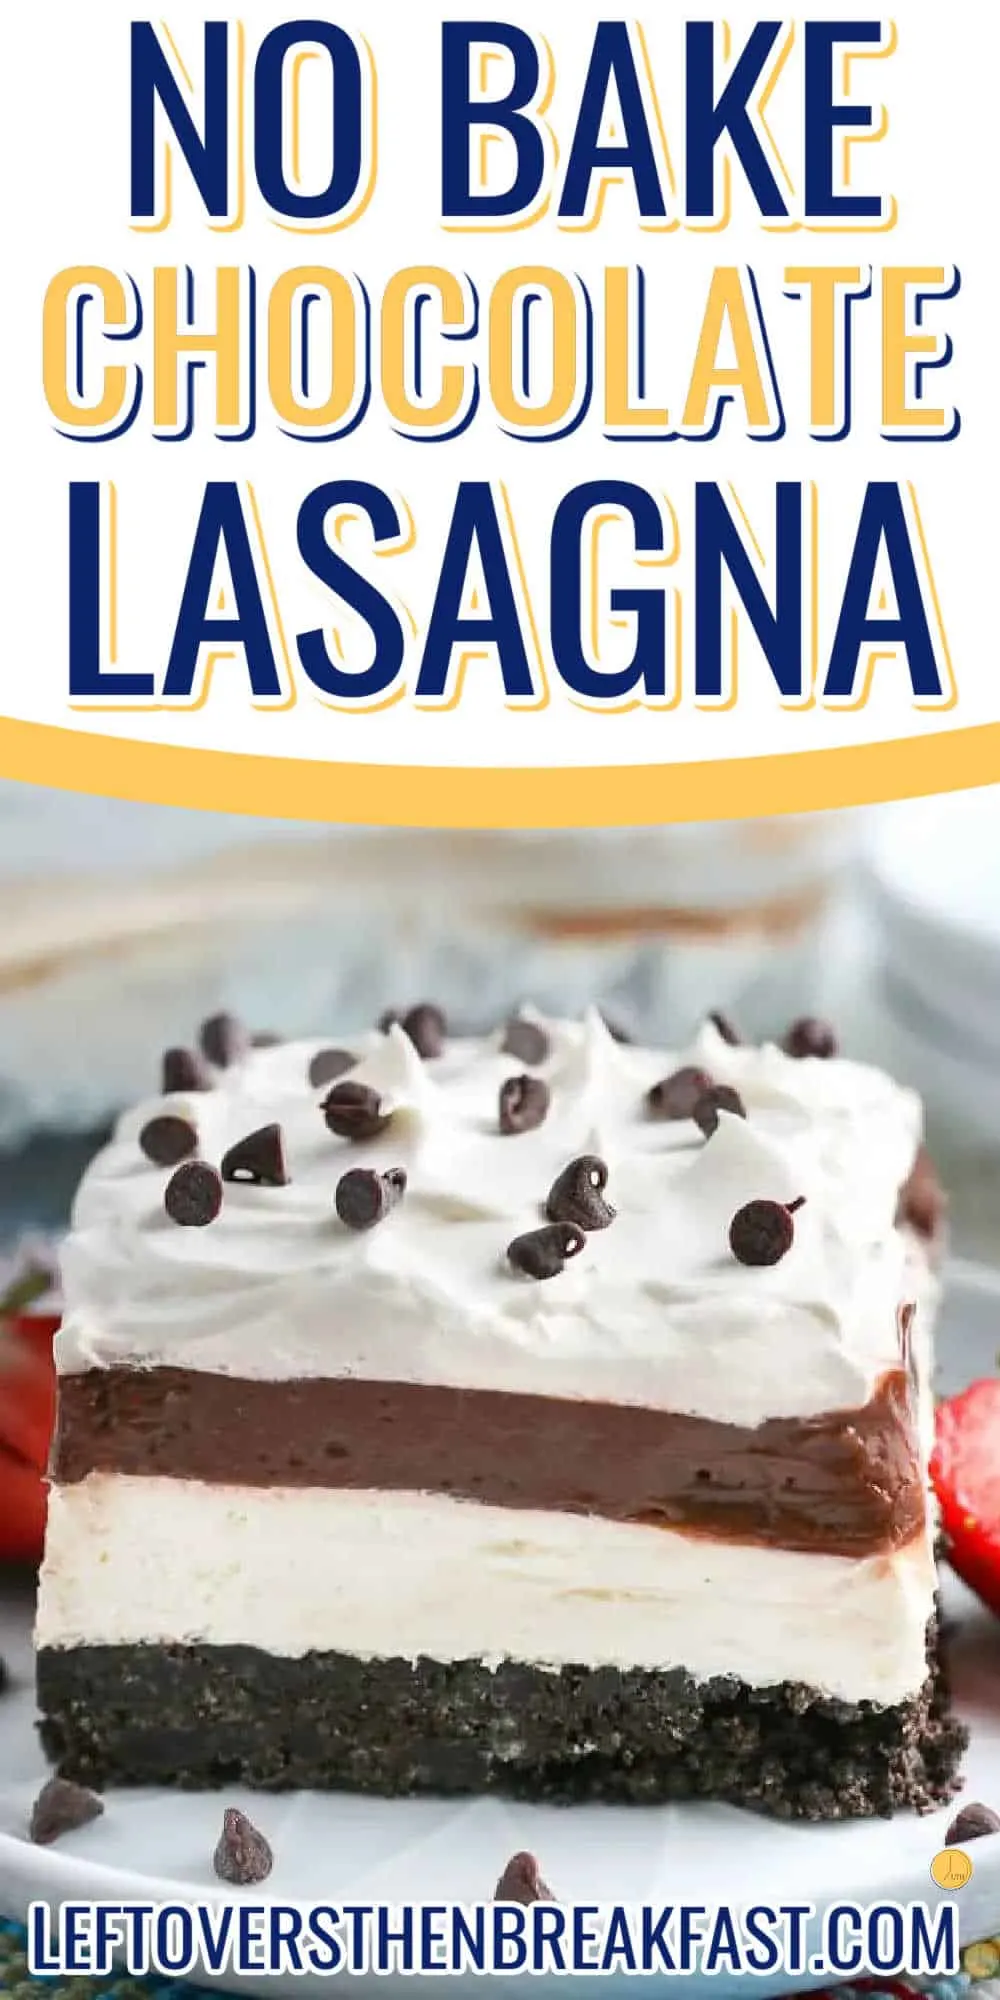 close up of square of chocolate lasagna with yellow banner and text